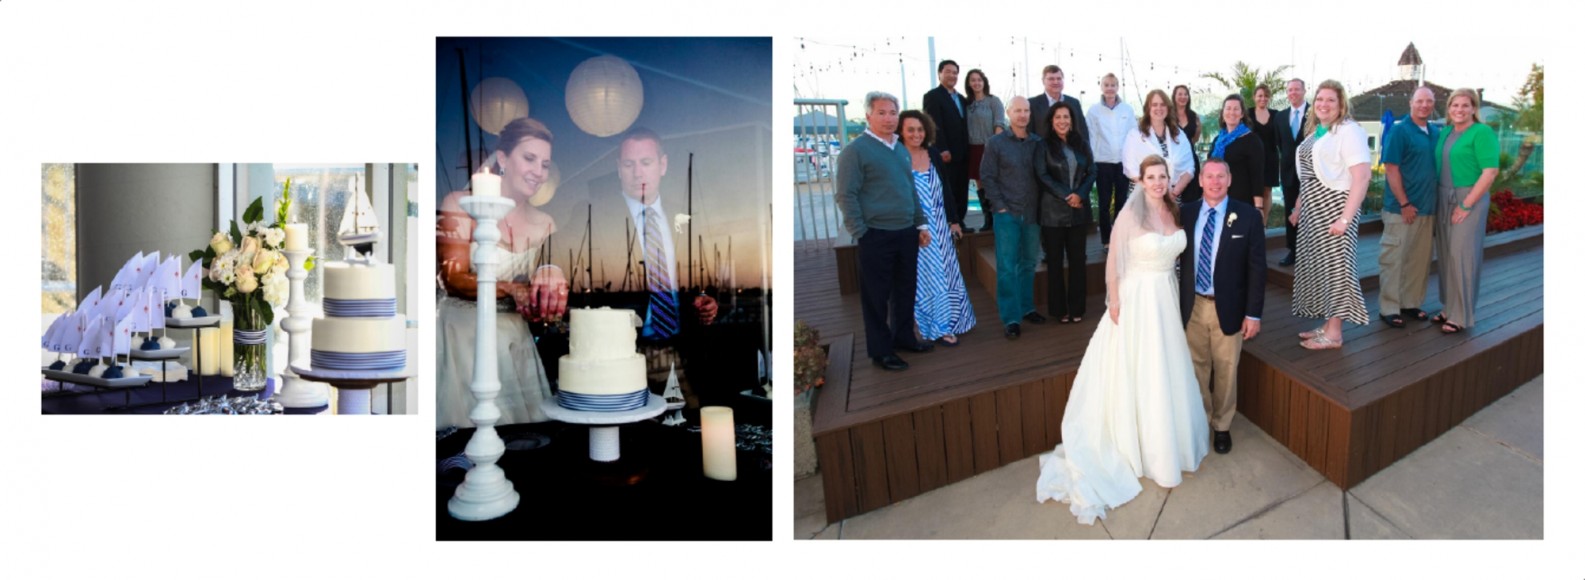 Laura and Davids Wedding Book - San Diego Yacht Wedding by Wedding Photographers Andrew Abouna - Pages 40-41